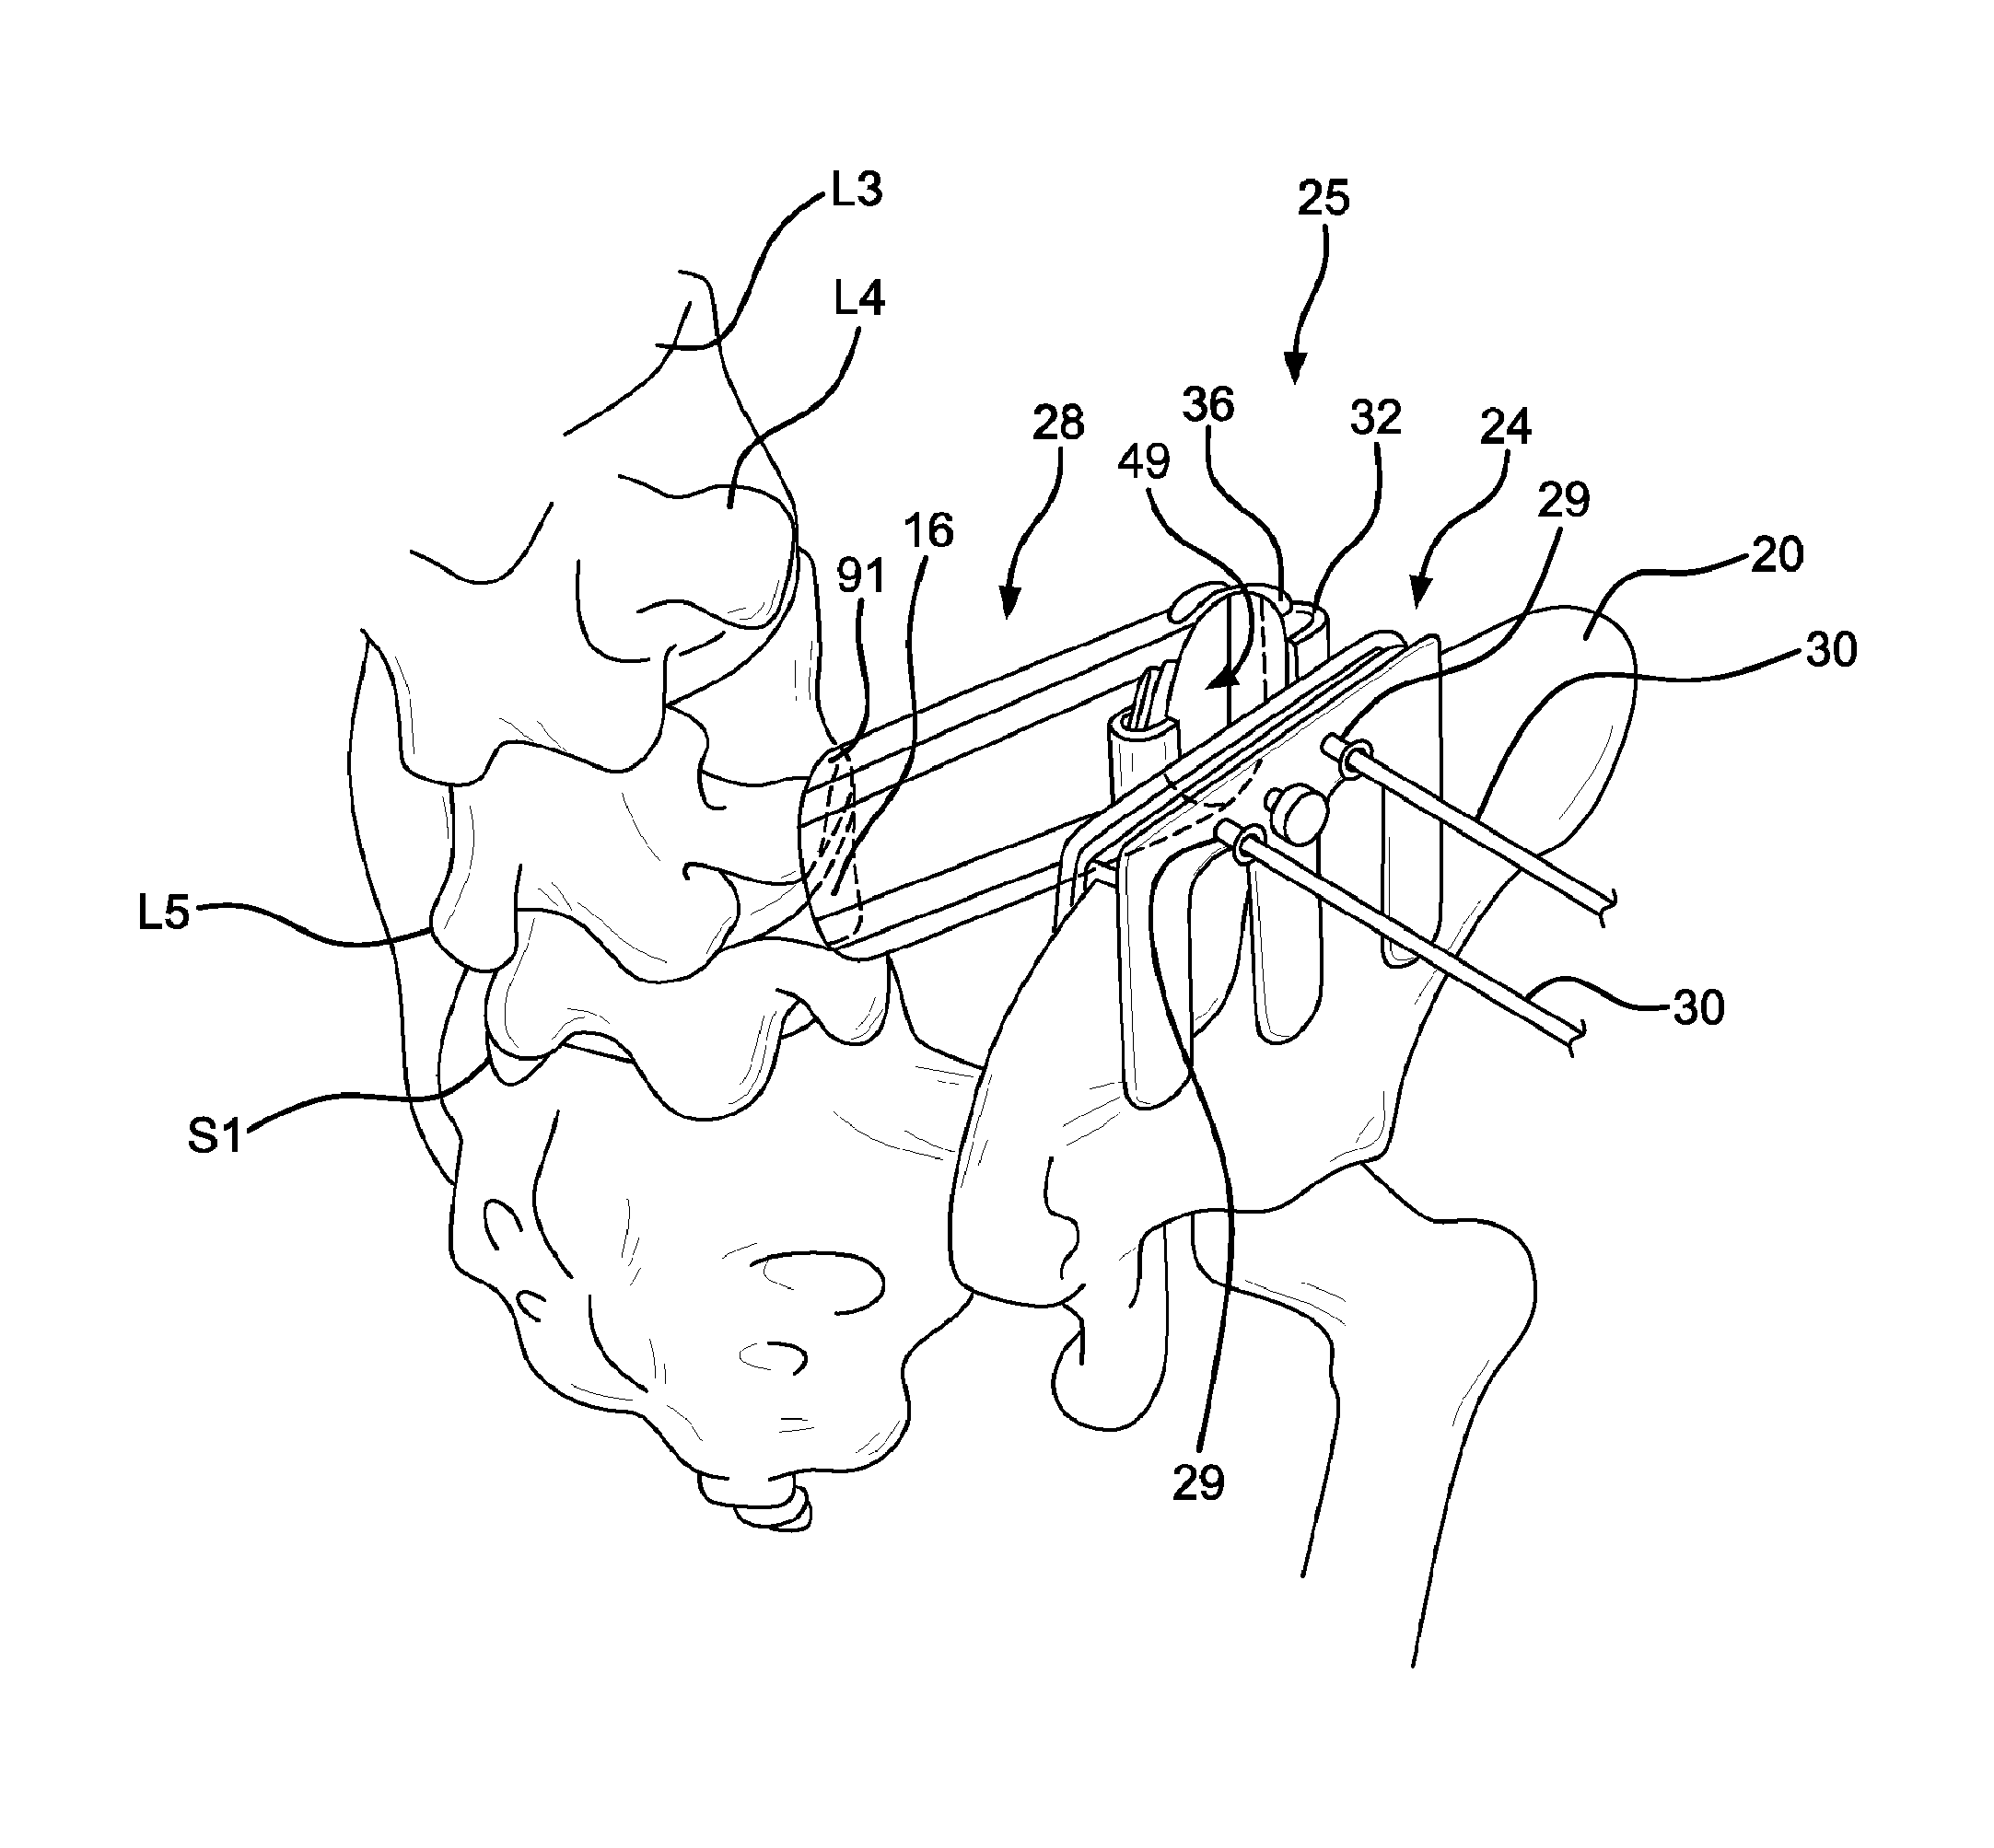 Method and apparatus for laterally accessing an intervertebral disc space